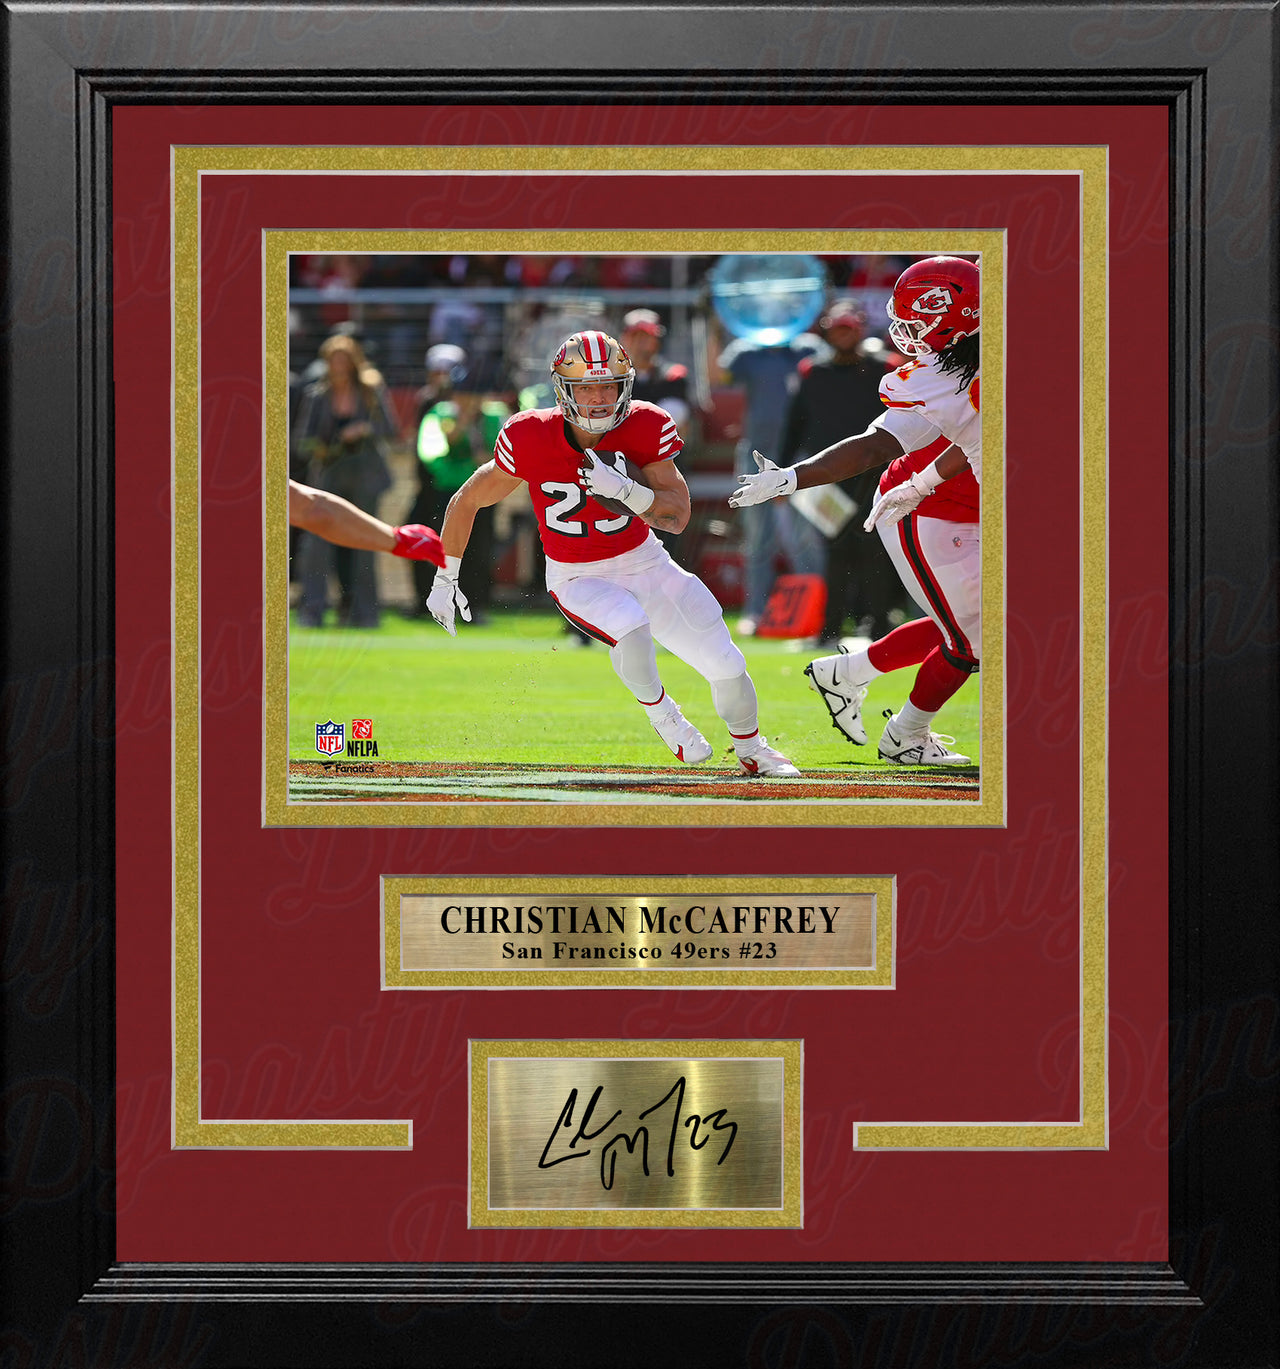 Christian McCaffrey in Action San Francisco 49ers 8x10 Framed Football Photo with Engraved Autograph